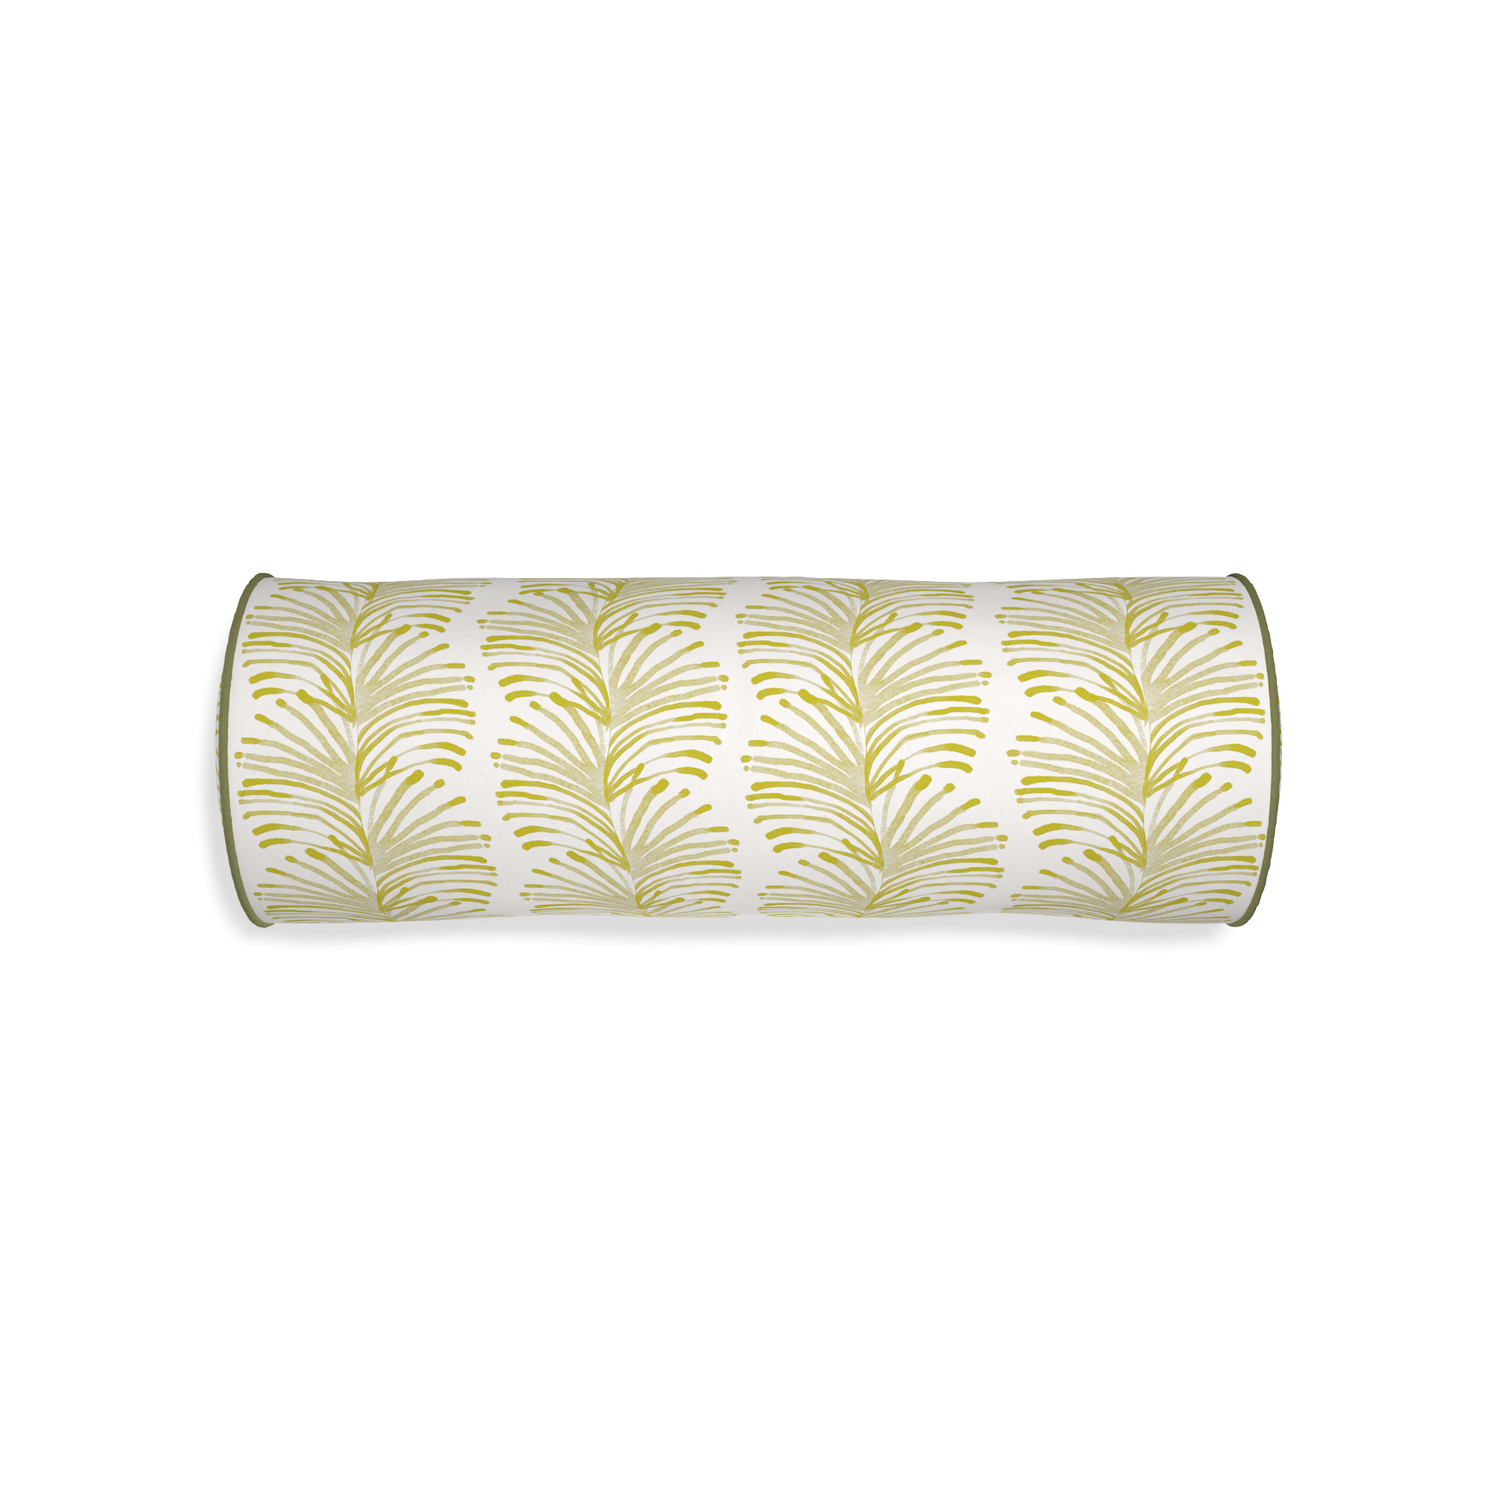 Bolster emma chartreuse custom yellow stripe chartreusepillow with moss piping on white background